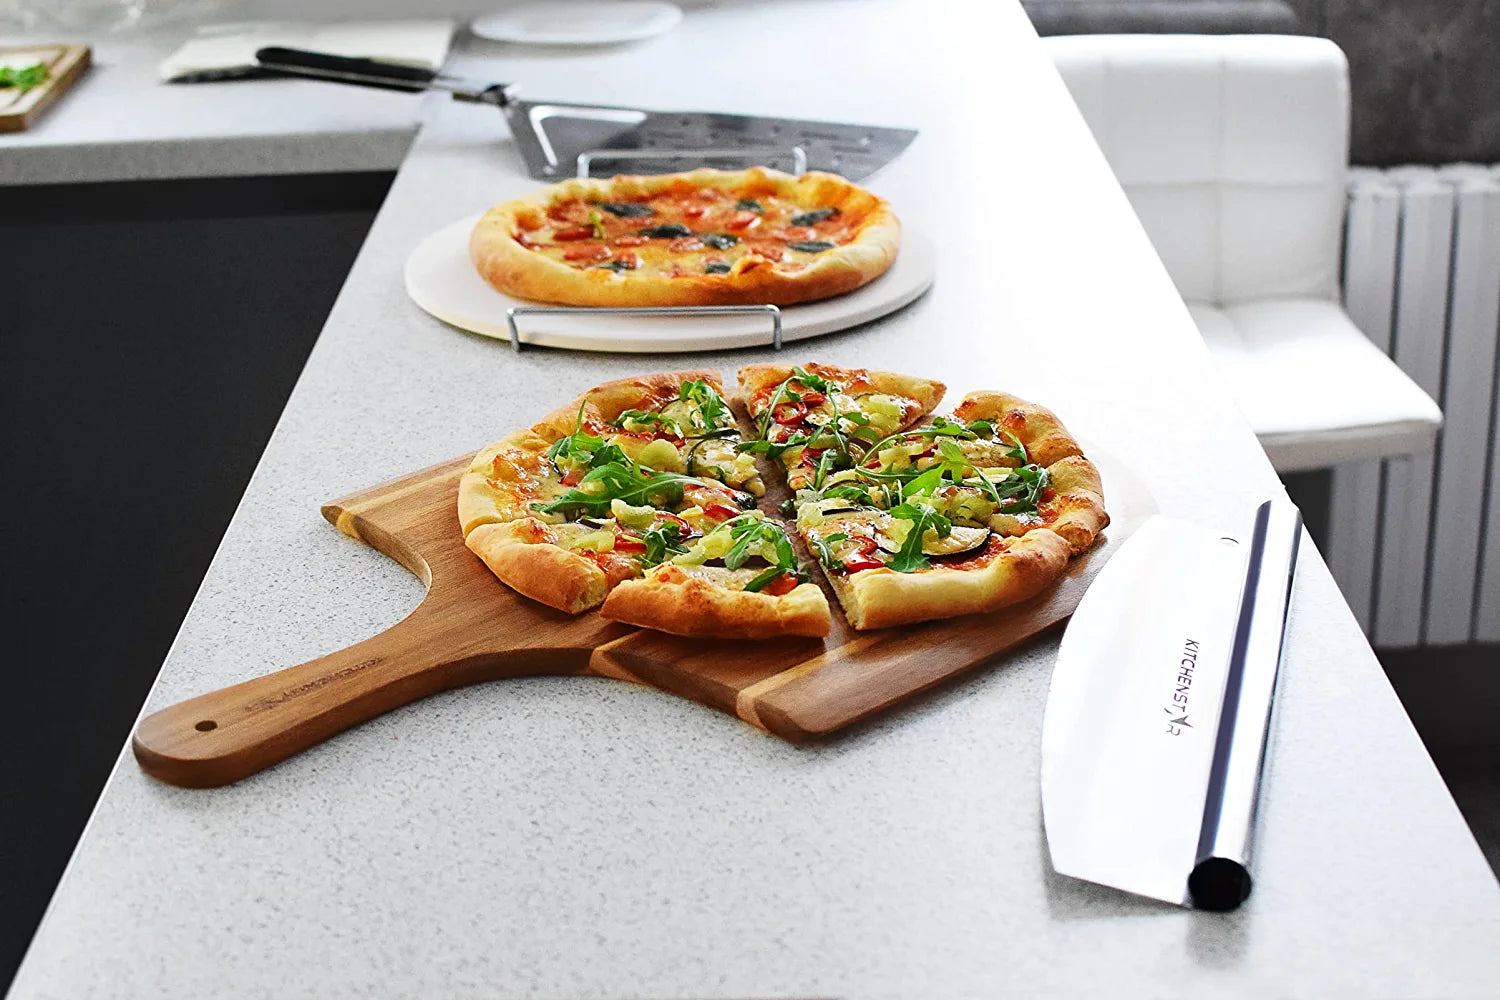 14 Pizza Making Kit by kitchenStar (Set of 2) - Pizza Cutter Rocker Knife  with Blade Cover + Perforated Stainless Steel Pizza Peel with Folding